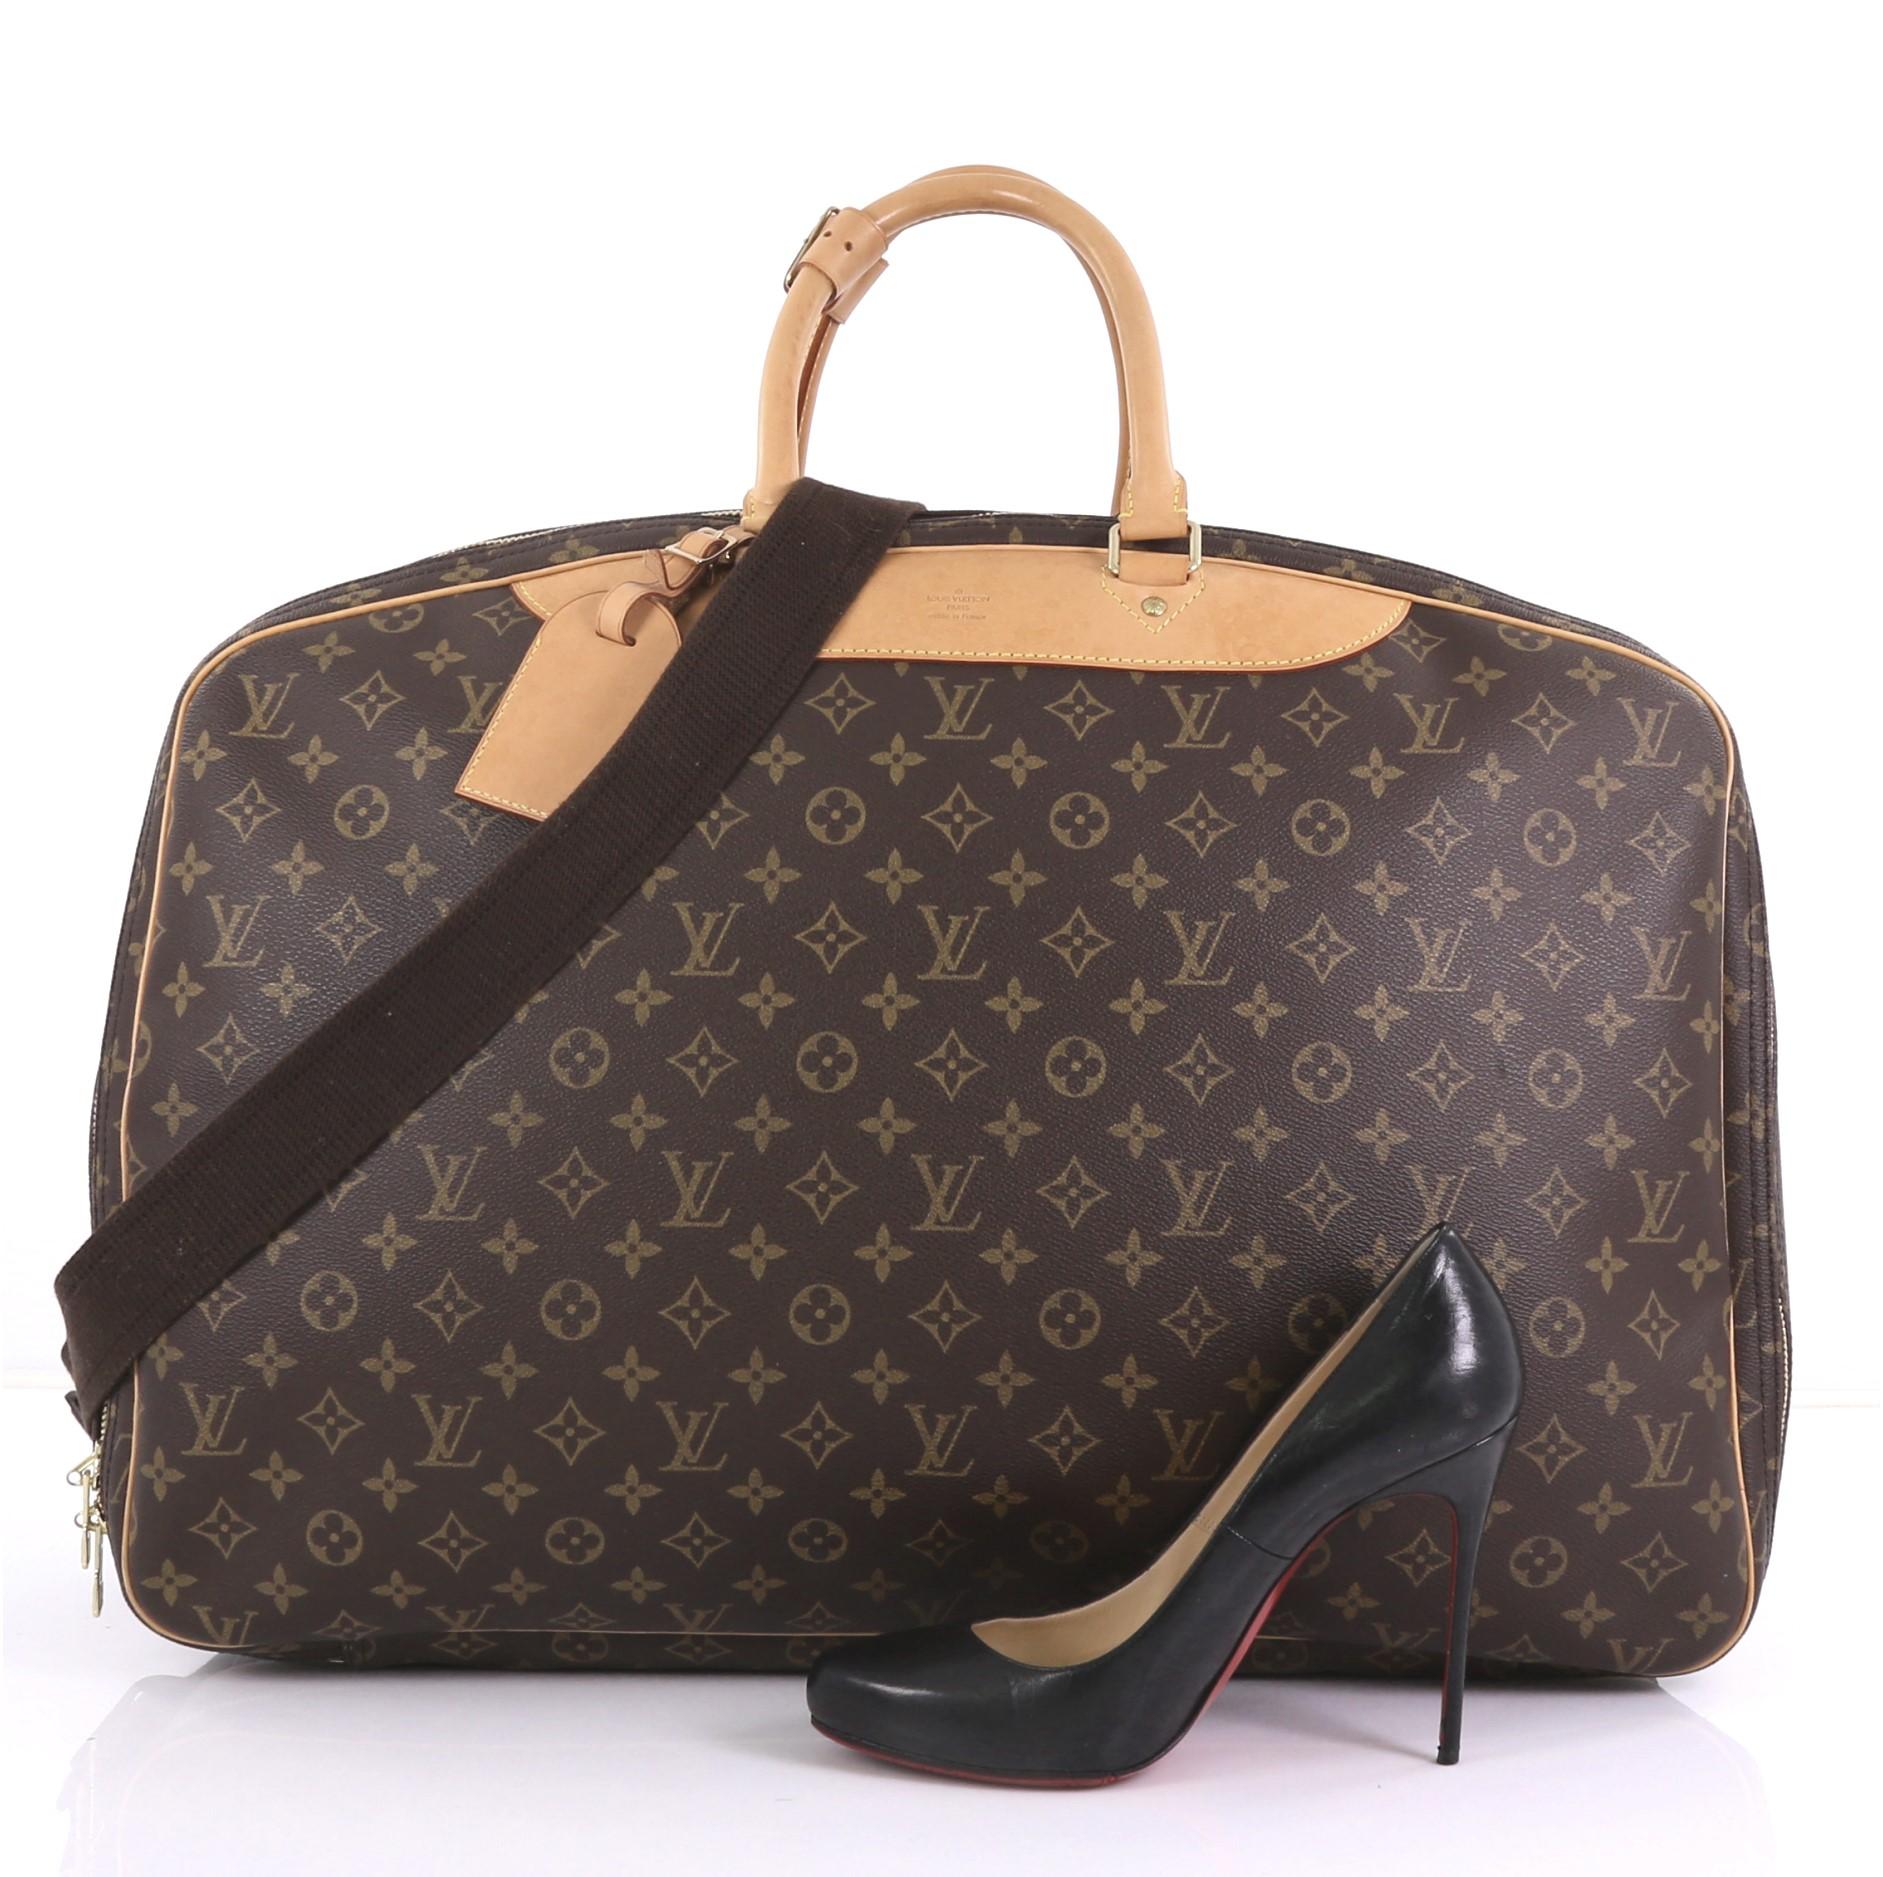 This Louis Vuitton Alize Bag Monogram Canvas 3 Poches, crafted in brown monogram coated canvas, features dual rolled leather handles and gold-tone hardware. Its double zip-around closure opens into three separate beige canvas interior compartments